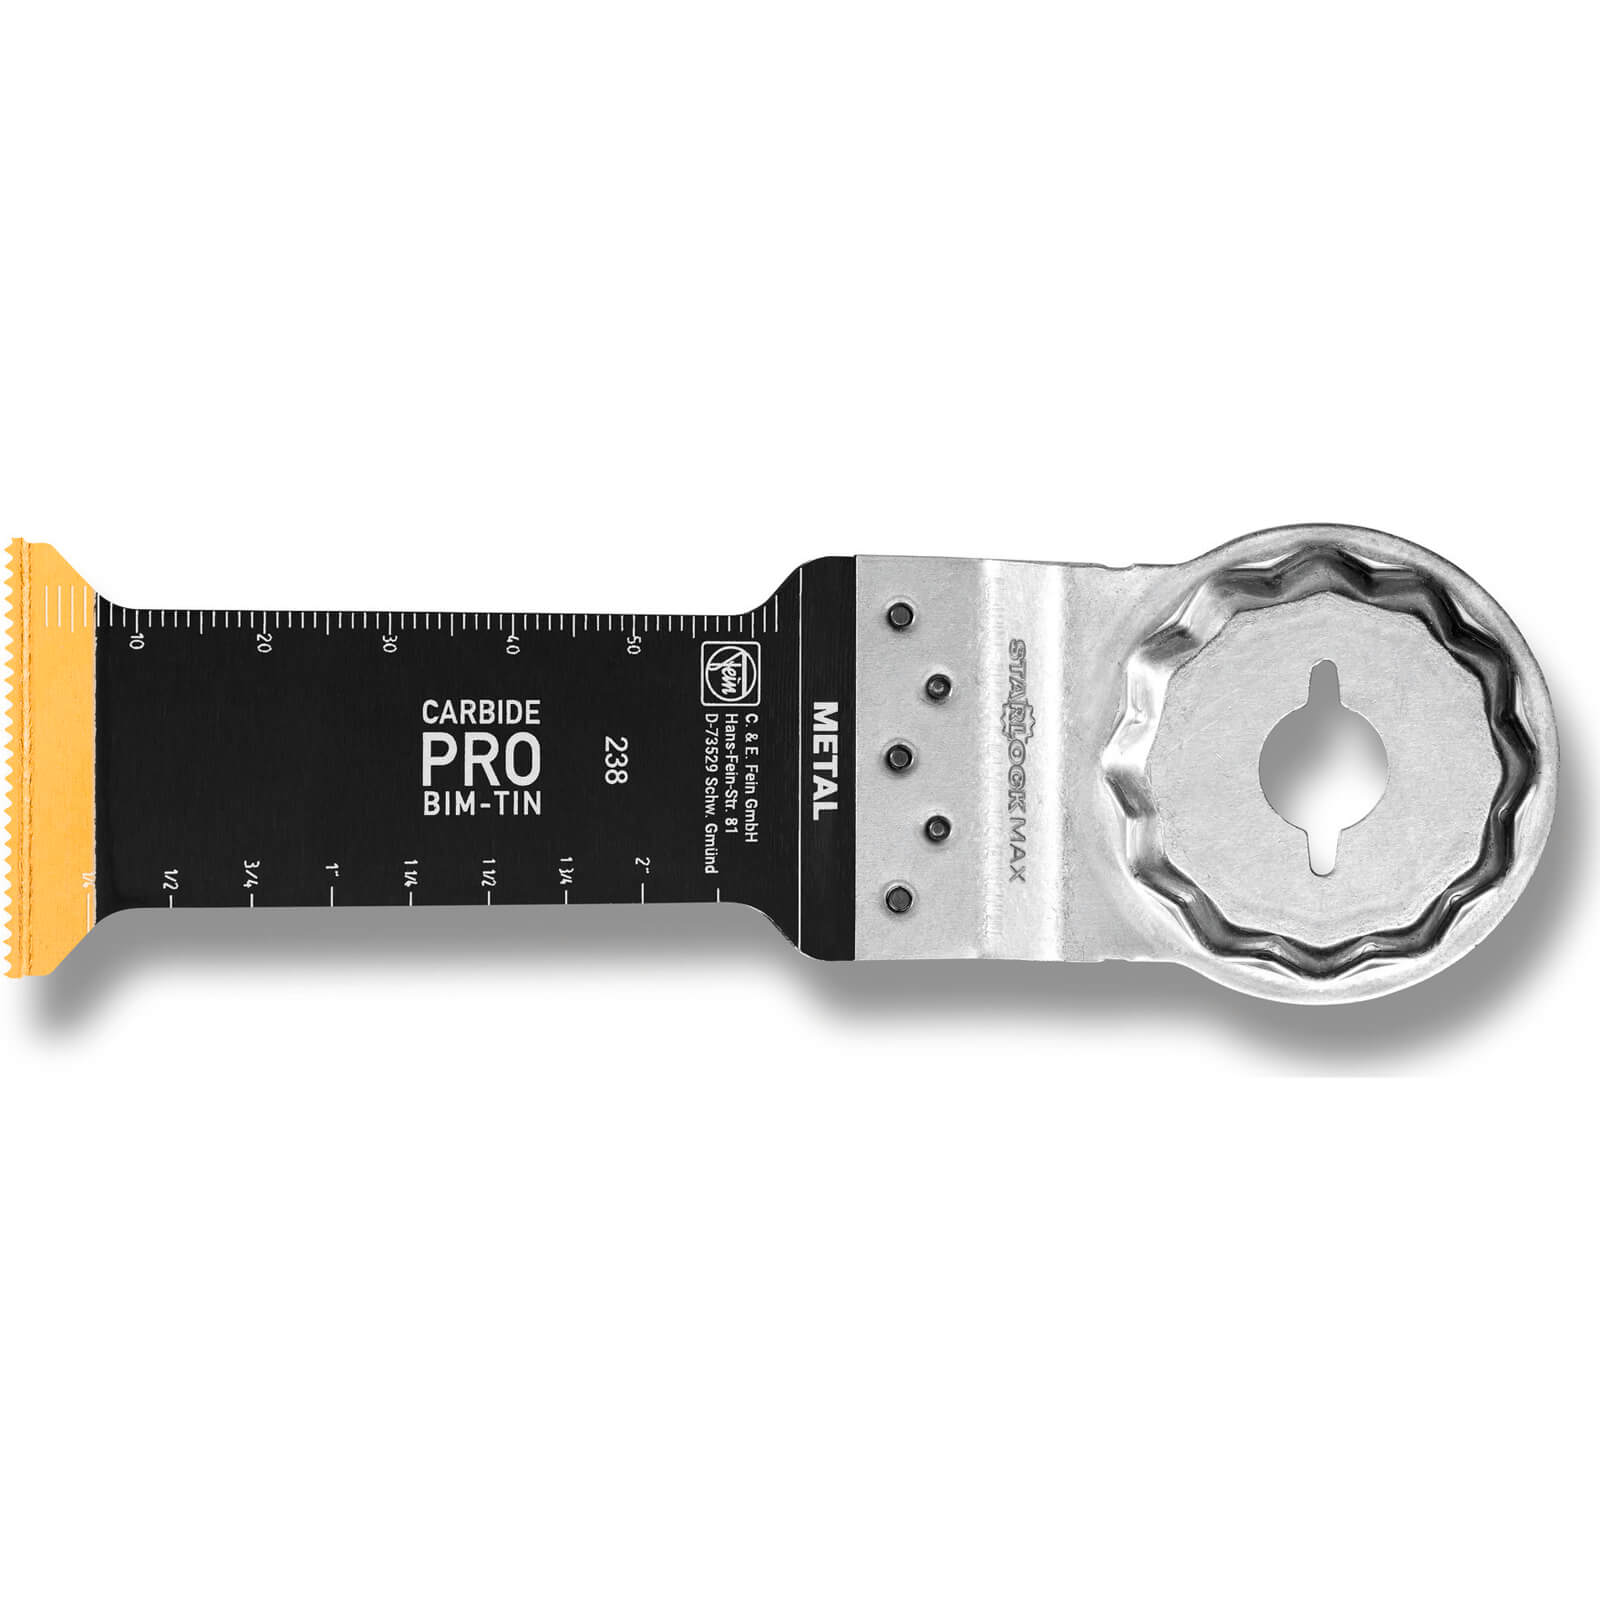 Fein E-Cut Carbide Pro Starlock Max Oscillating Multi Tool Plunge Saw Blade 32mm Pack of 3